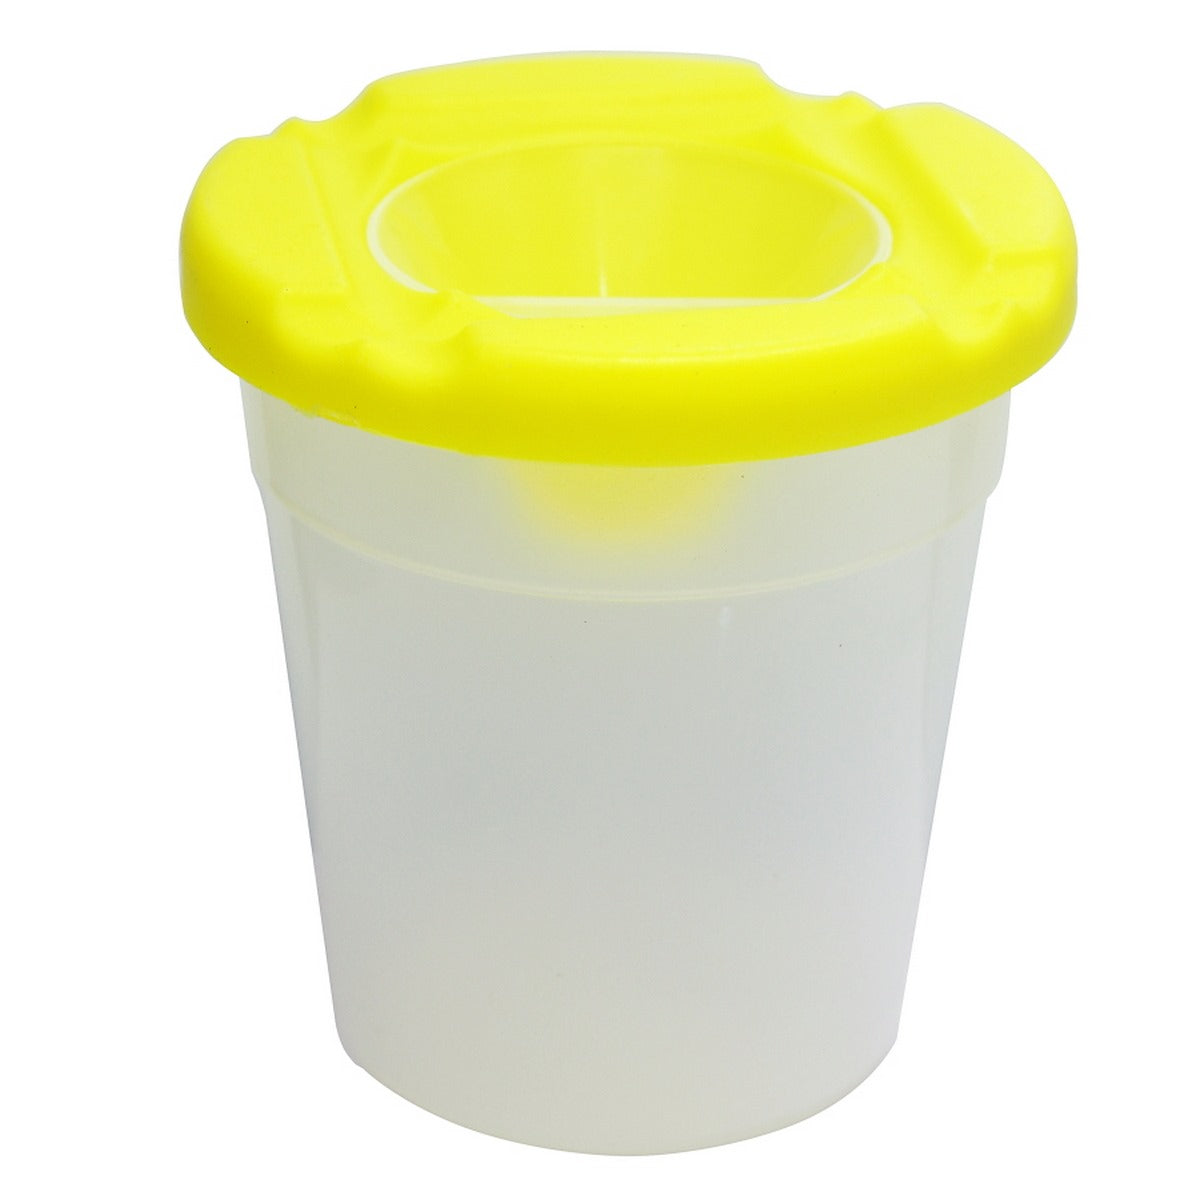 jags-mumbai Brush Brush Pigment Cup Small - Compact and Versatile Container for Paint Mixing and Storing